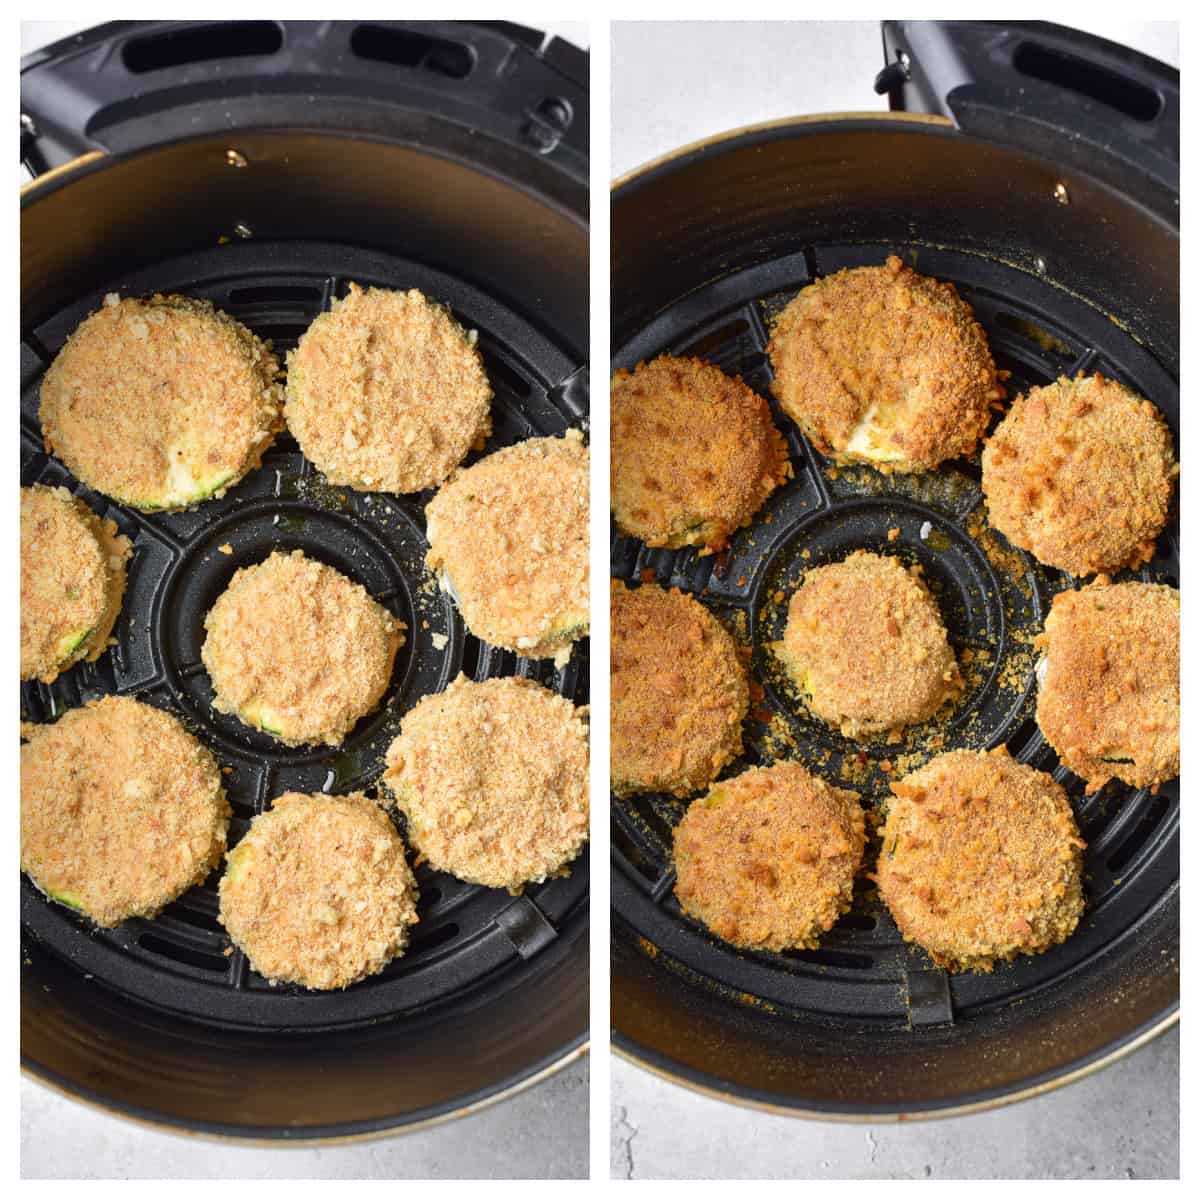 Zucchini bites cooking in the air fryer.